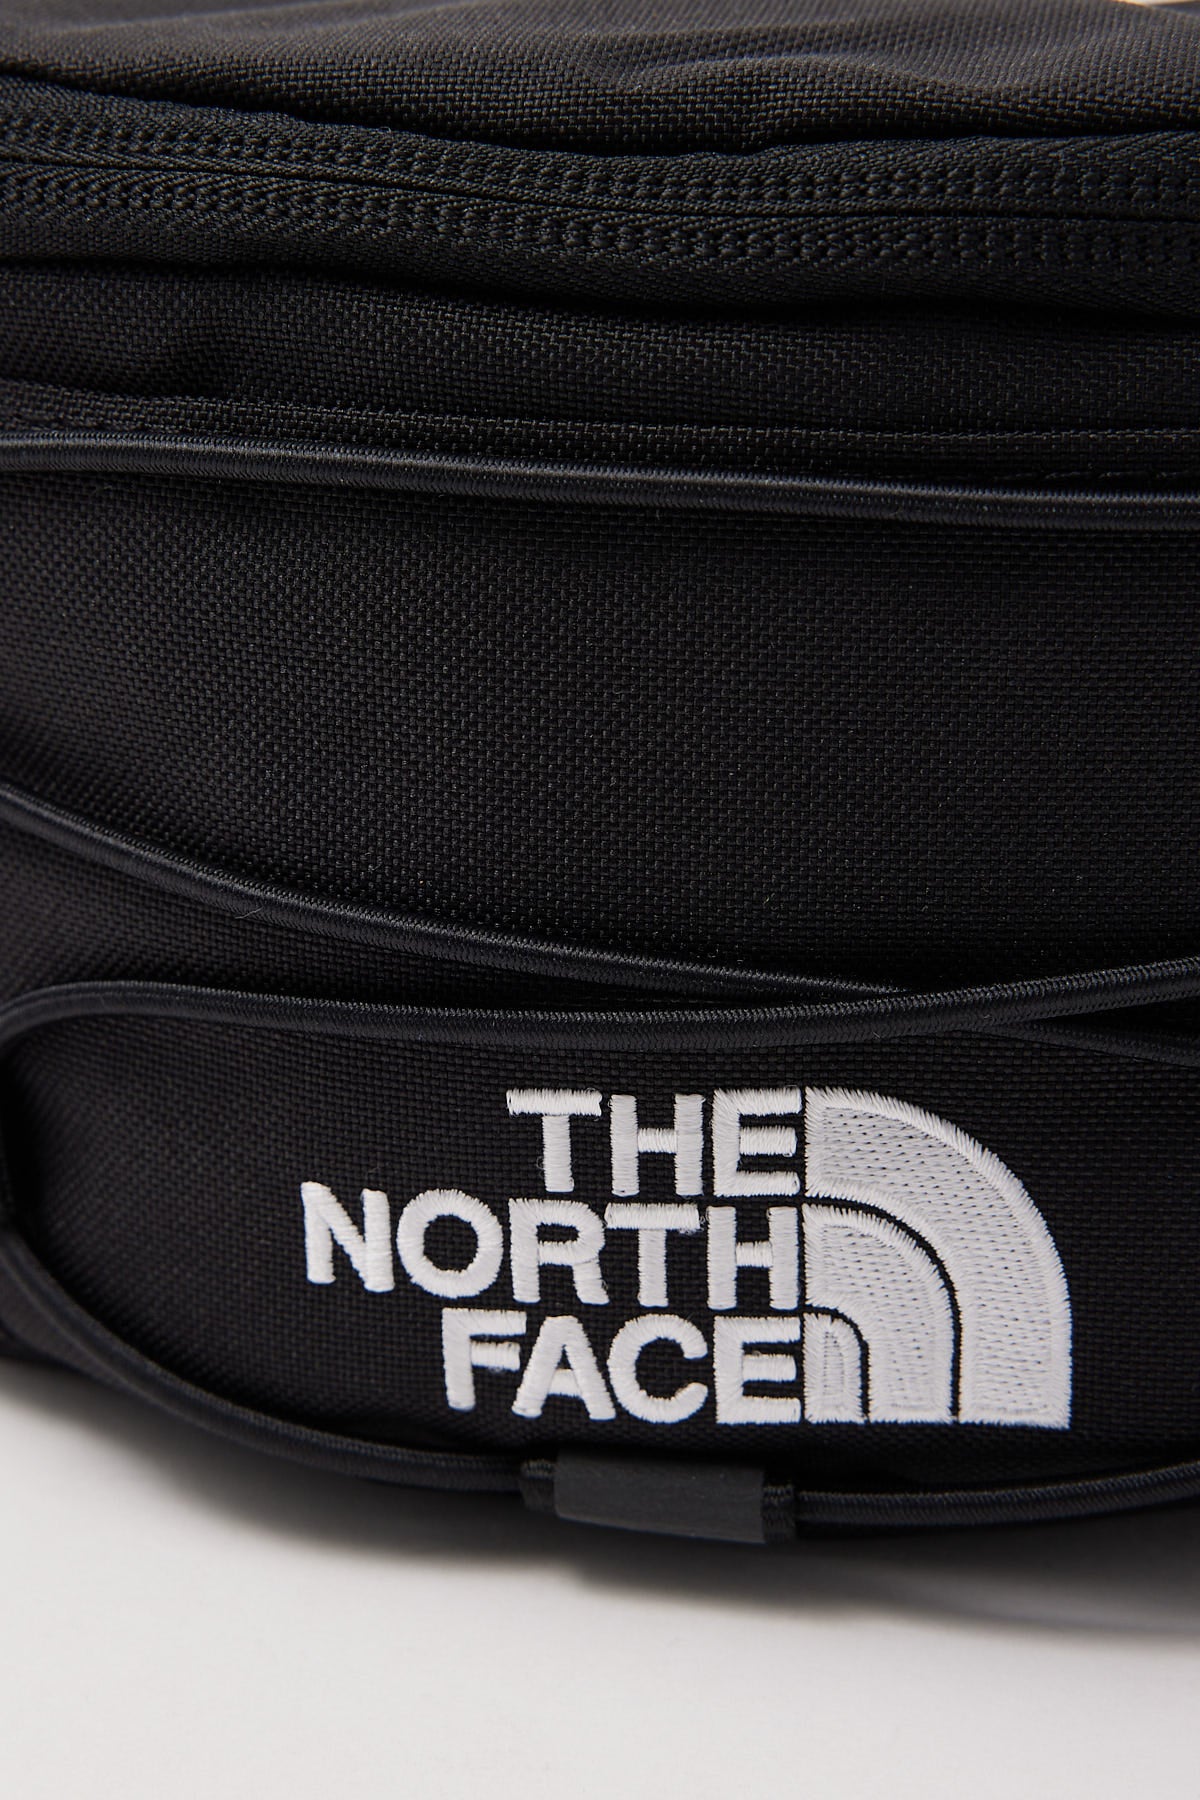 The North Face Jester Lumbar Black